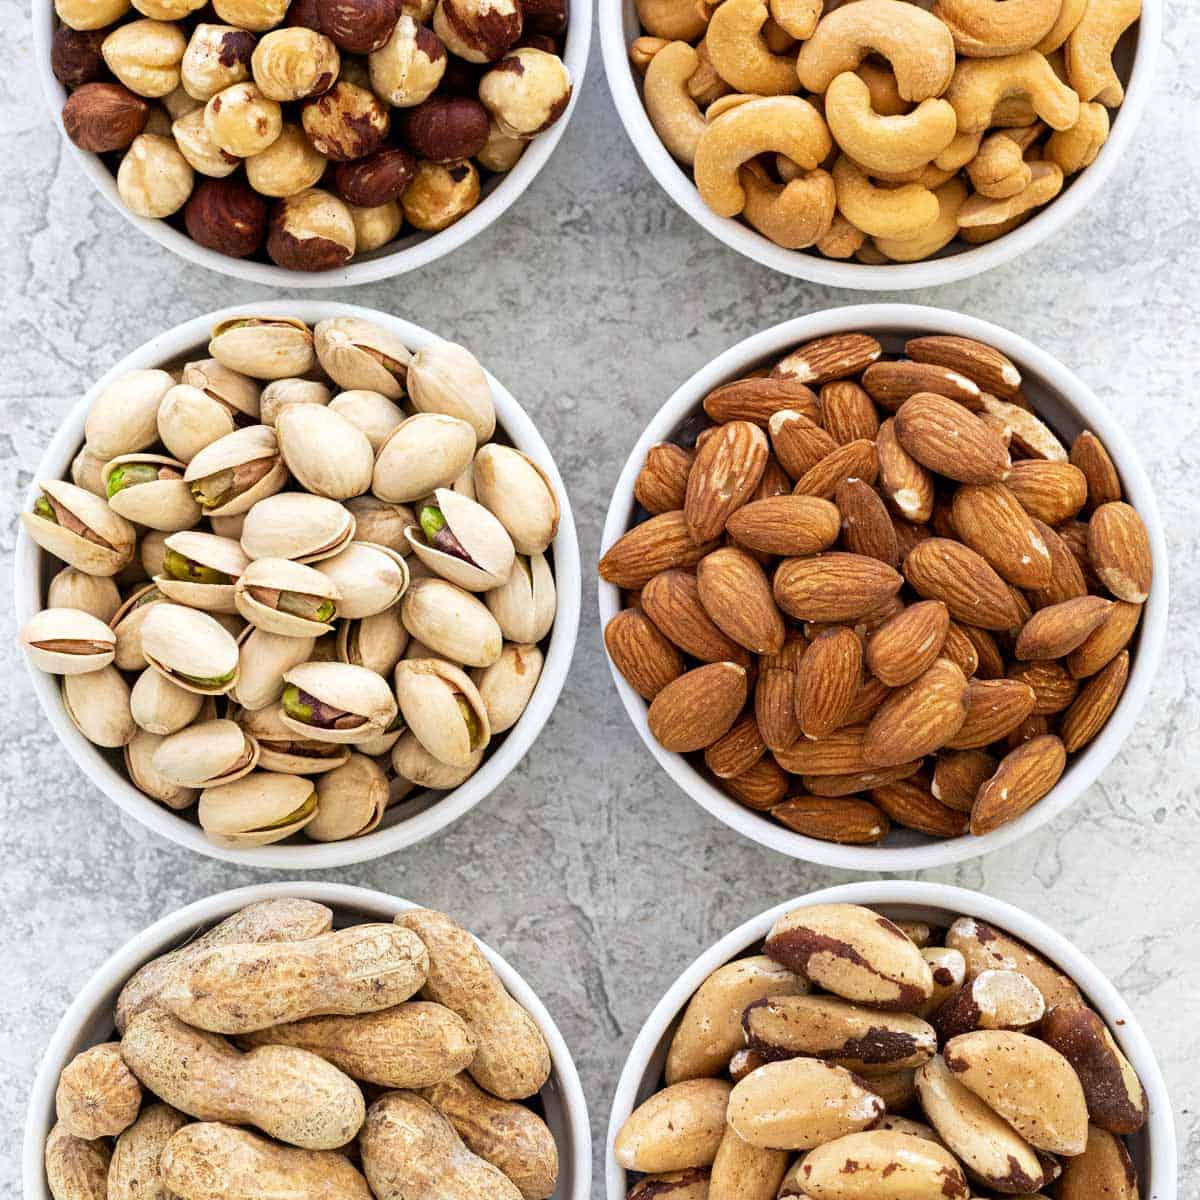 types-of-nuts-2-1200